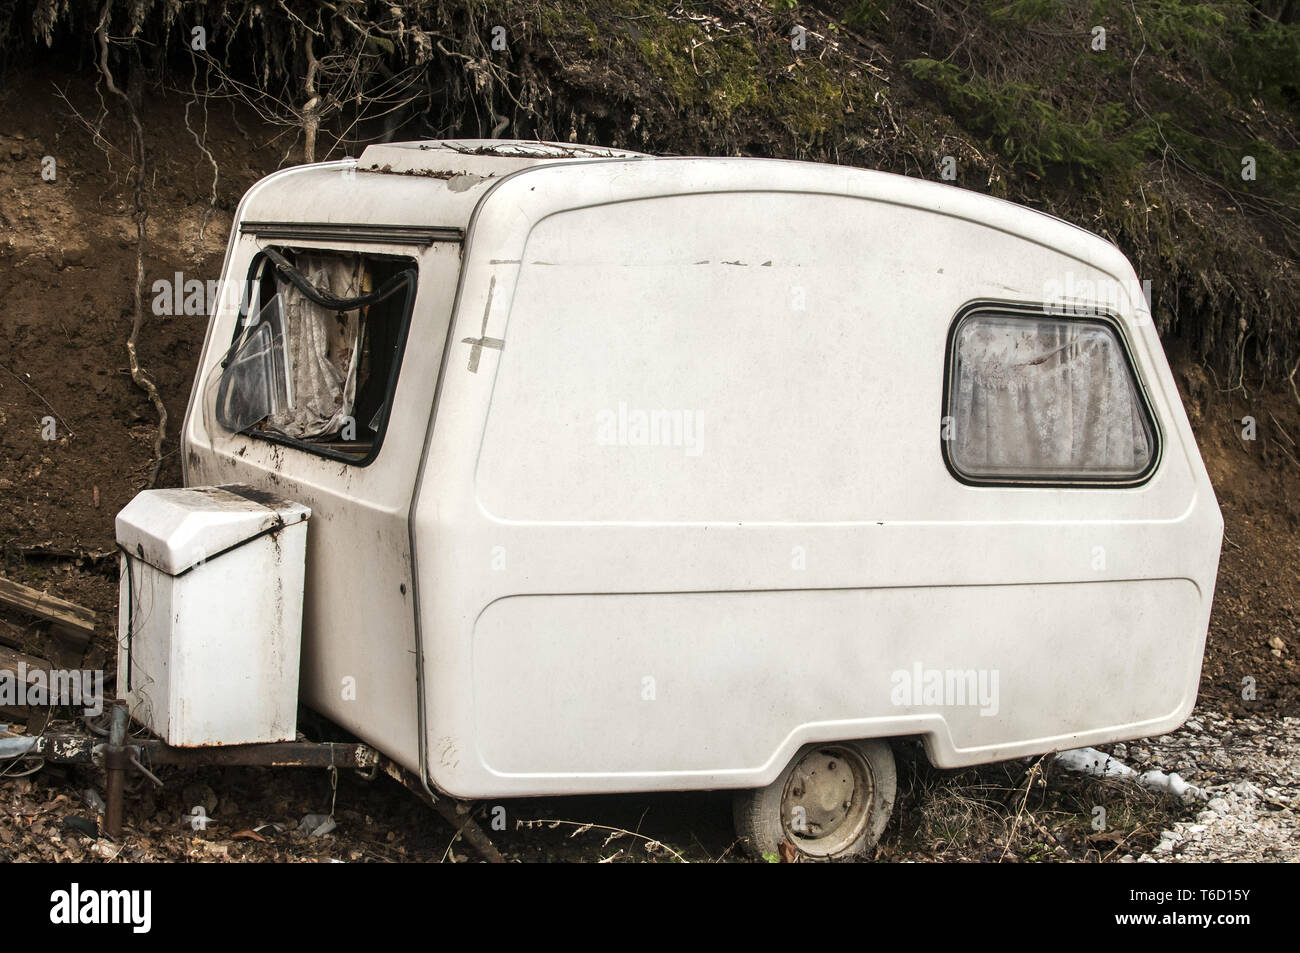 Old abandoned weathered small white vintage caravan Stock Photo